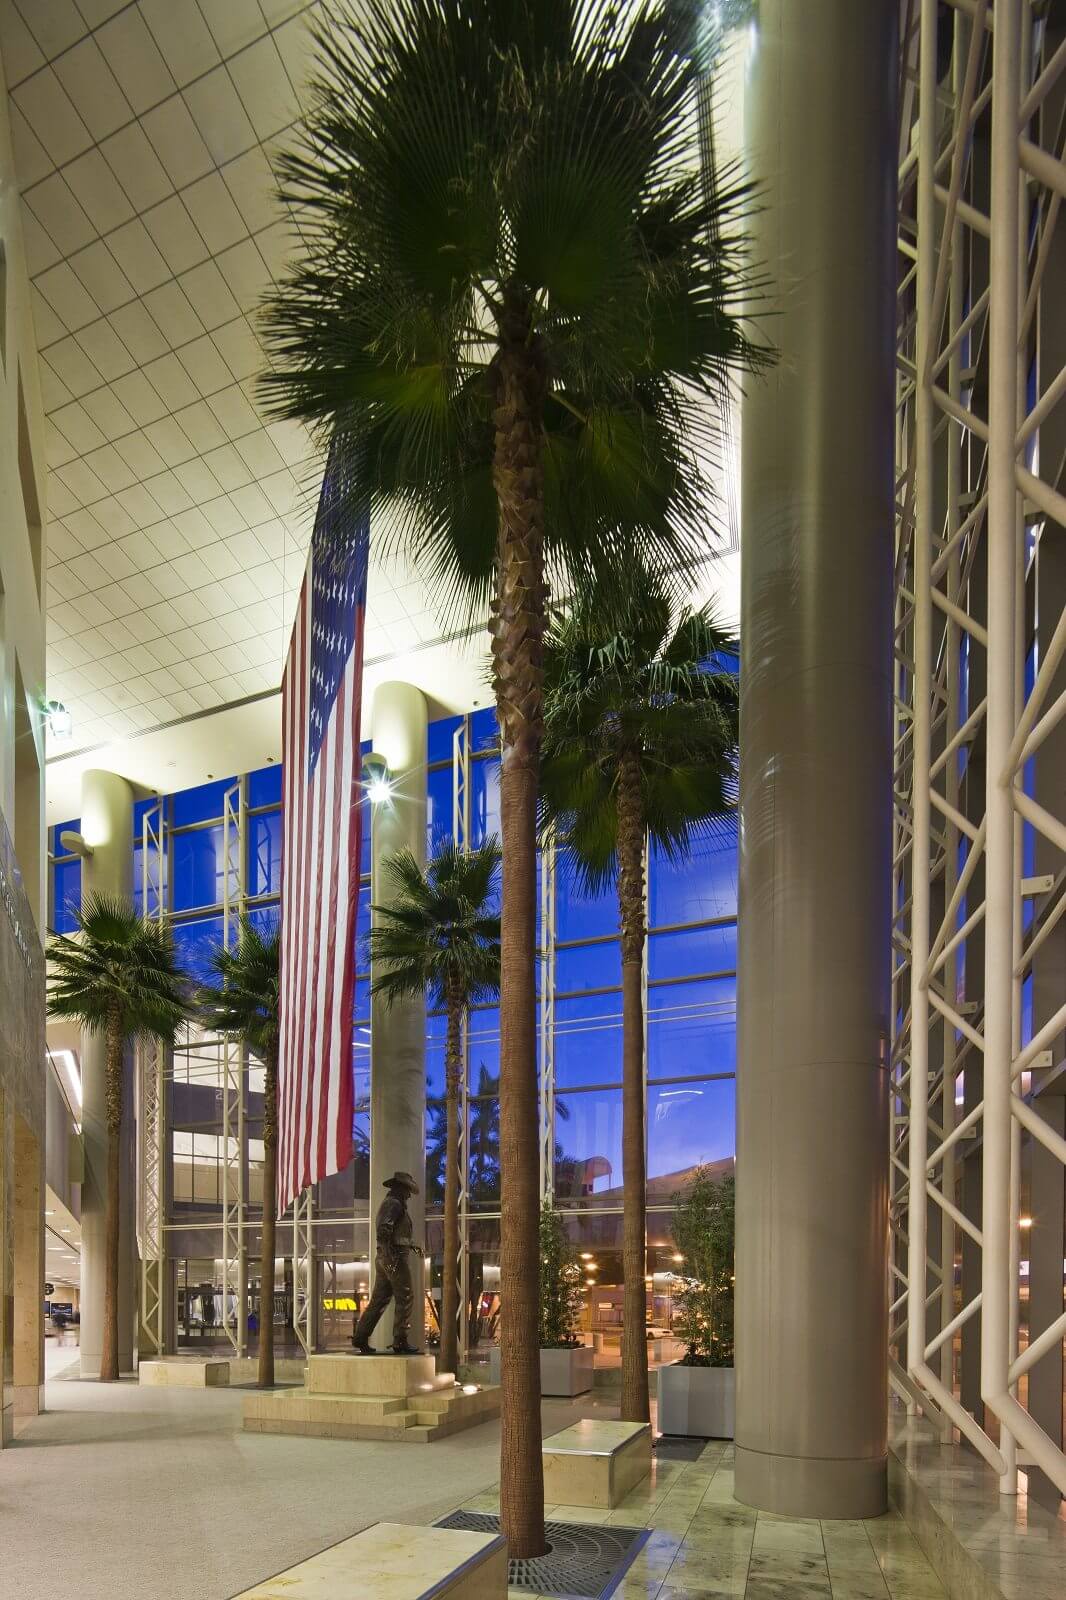 Preserved Washingtonia Robusta Palm Trees and Trimmed Fabricated Golden Bamboo Plants at John Wayne Airport